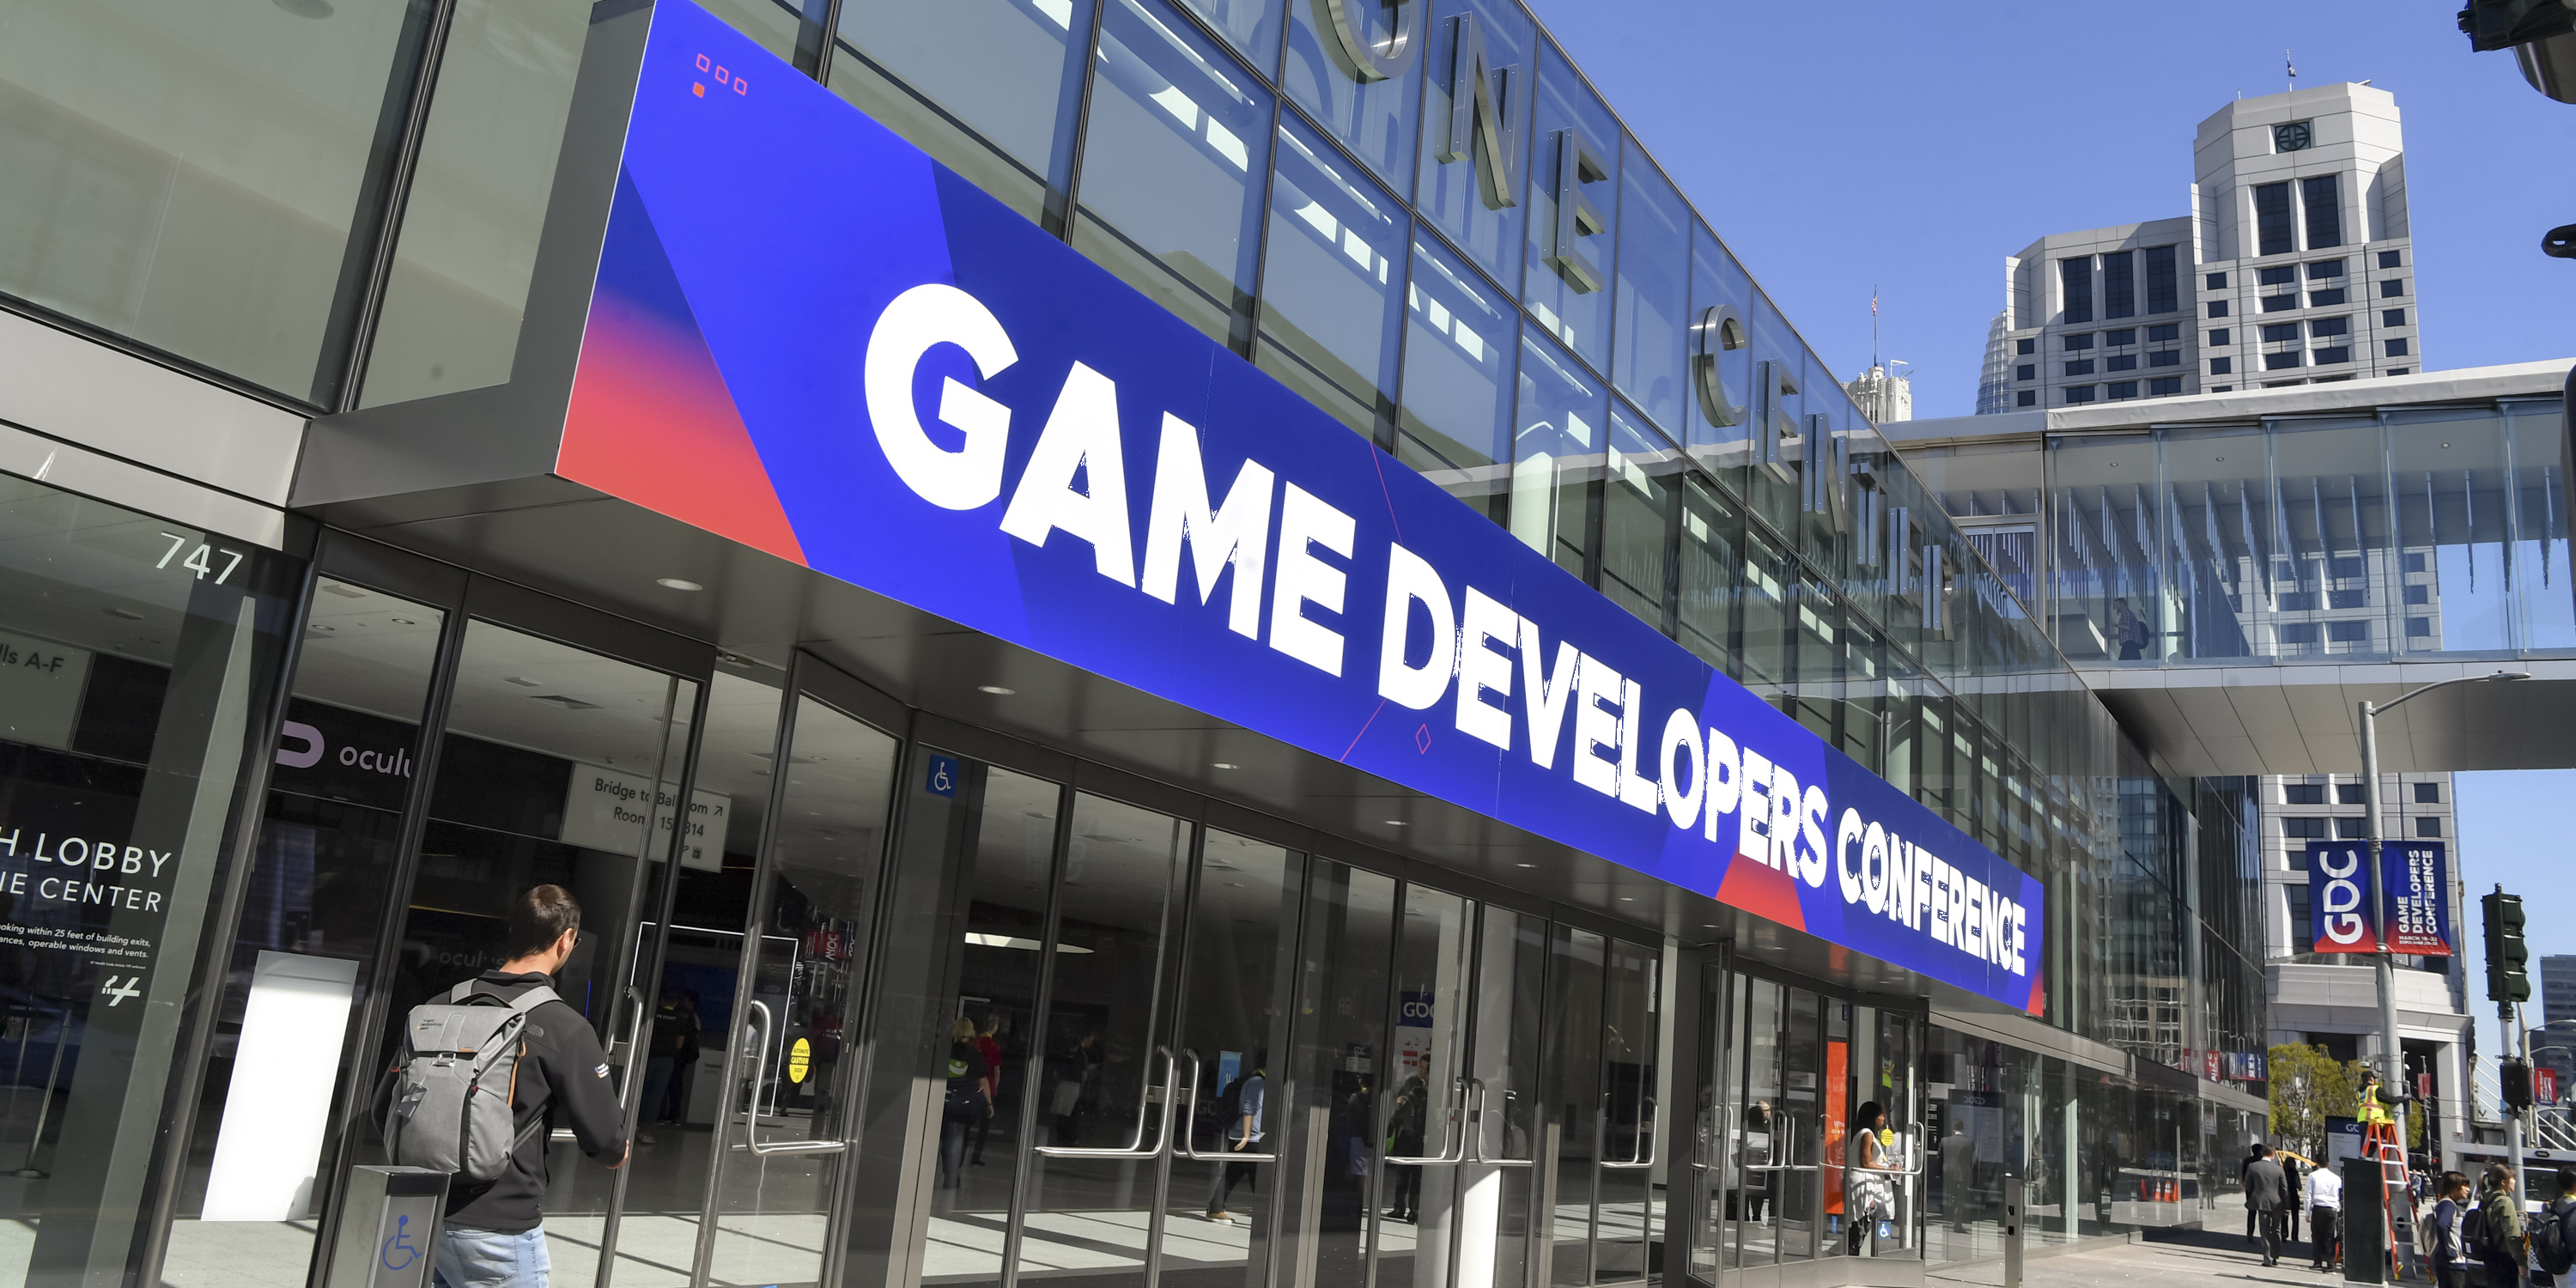 Game Developers Conference: The annual event returns to San Francisco in 2022